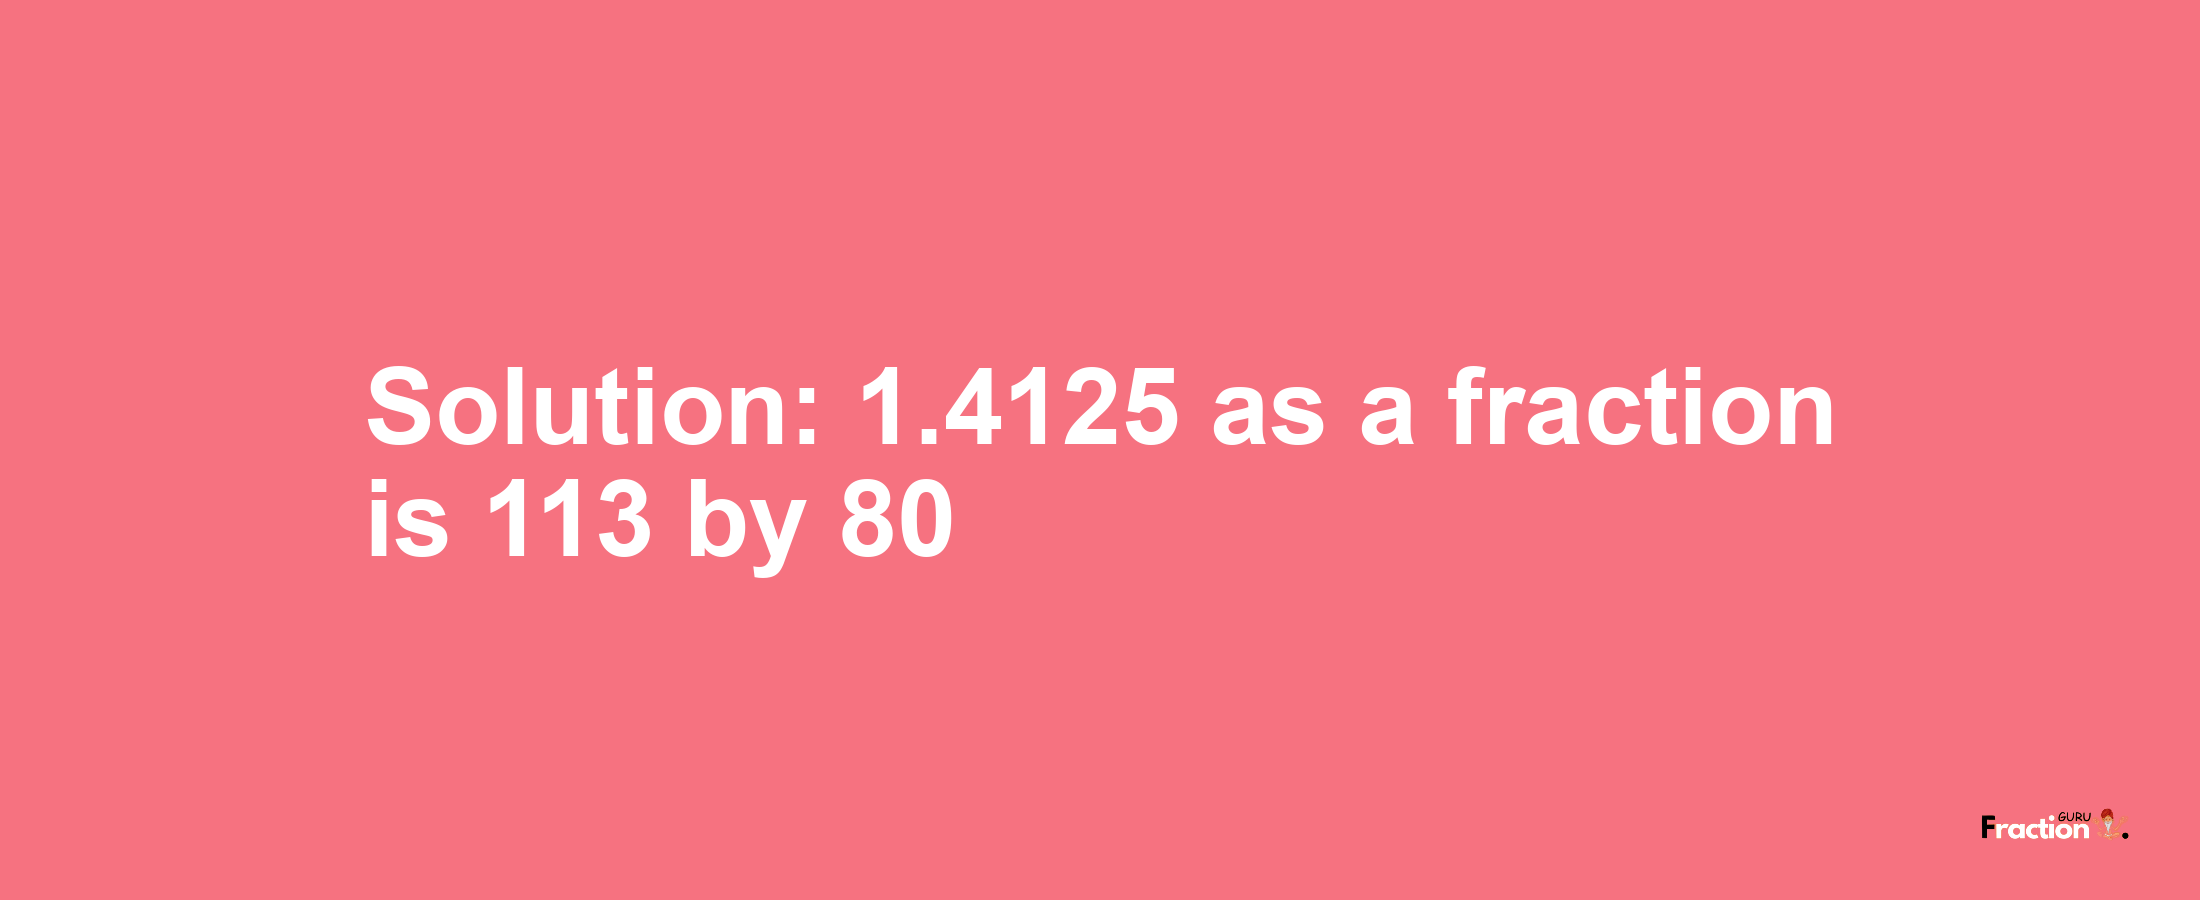 Solution:1.4125 as a fraction is 113/80